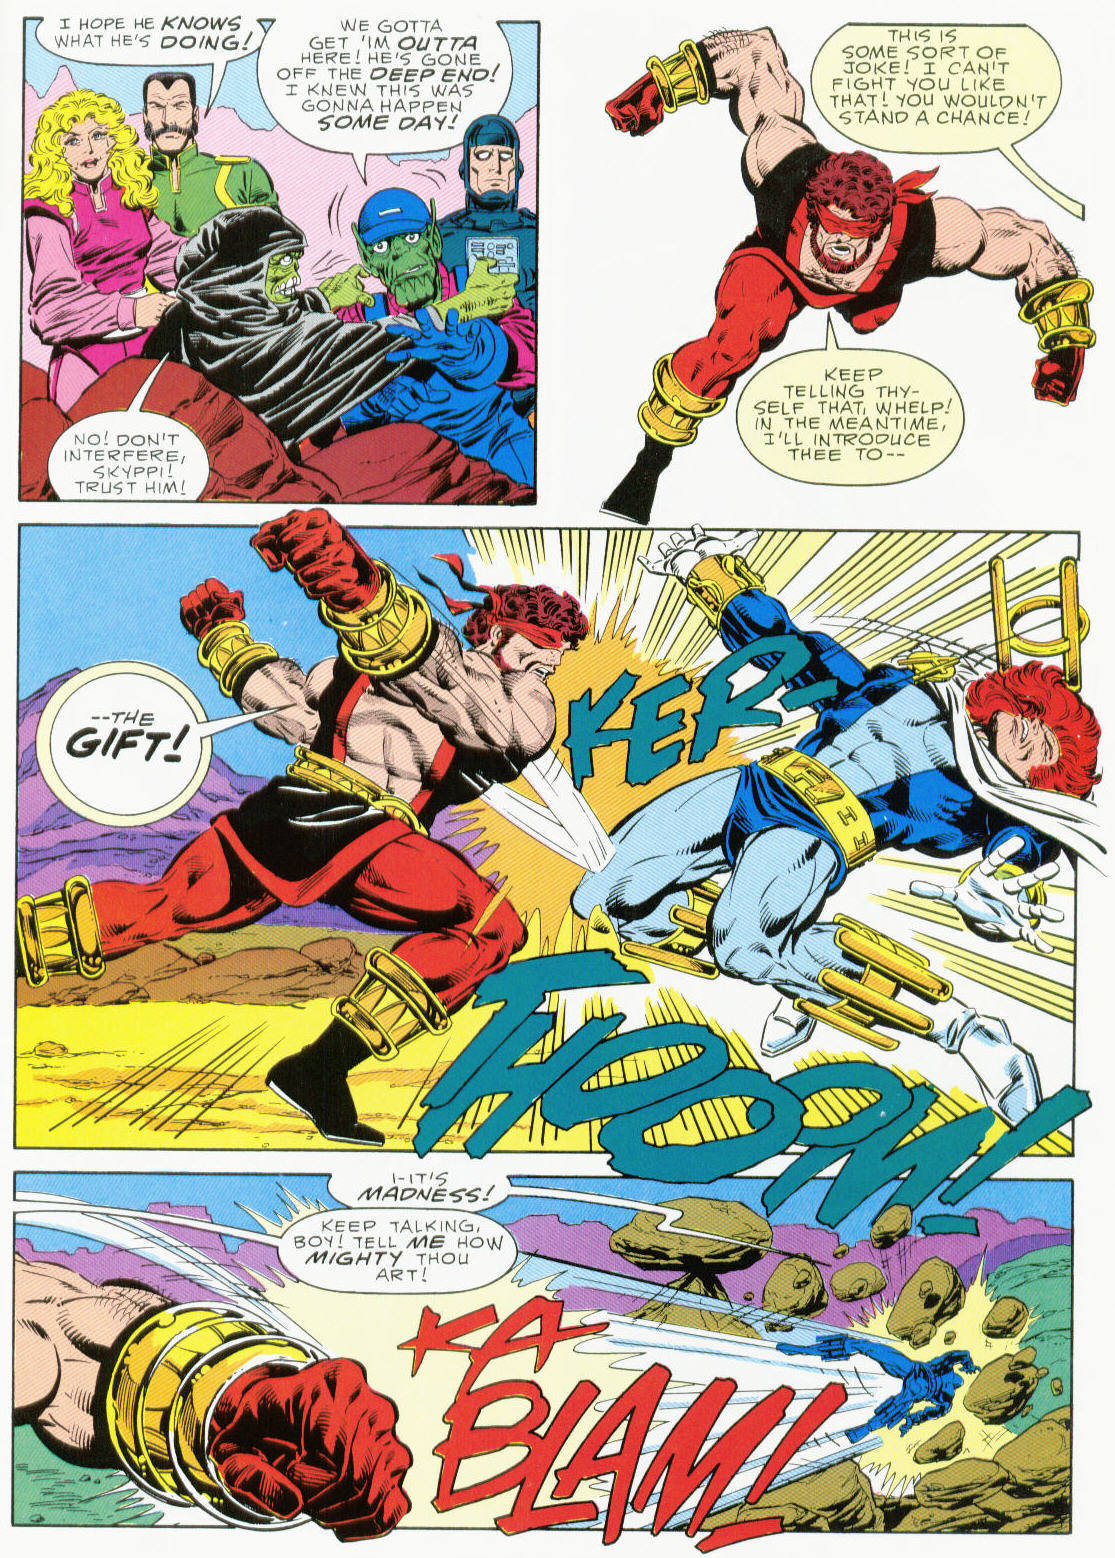 Marvel Graphic Novel issue 37 - Hercules Prince of Power - Full Circle - Page 67